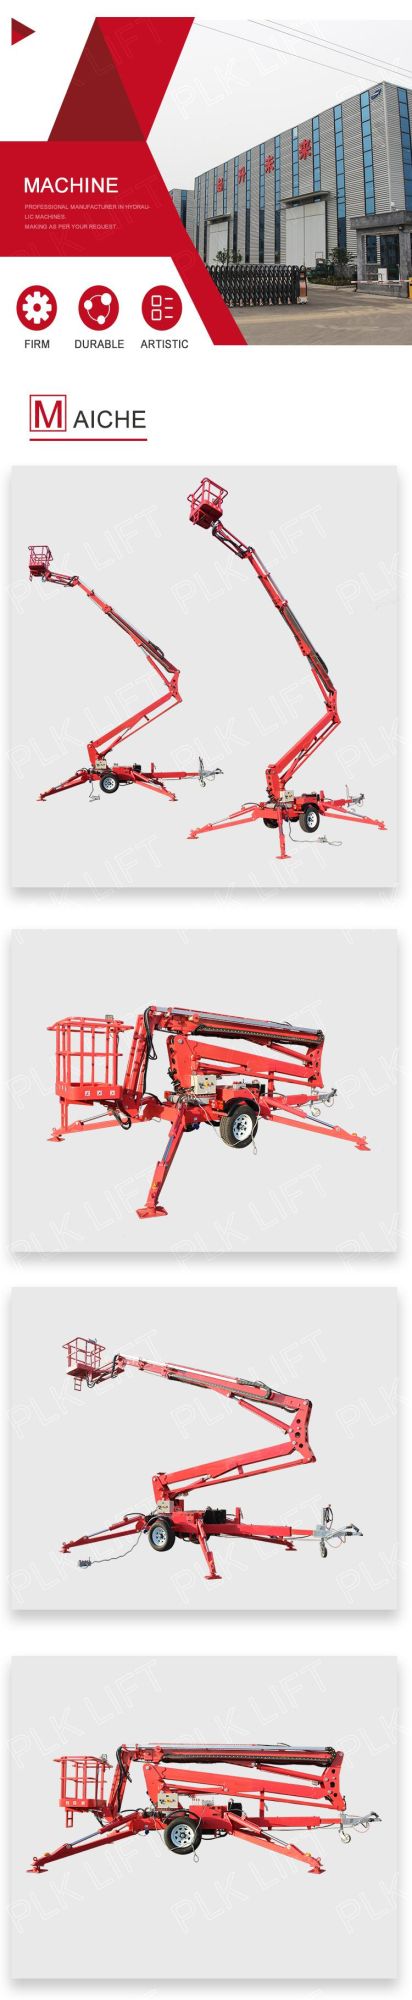 14m Hydraulic Spider Towable Cherry Picker Boom Lift for EU Countries